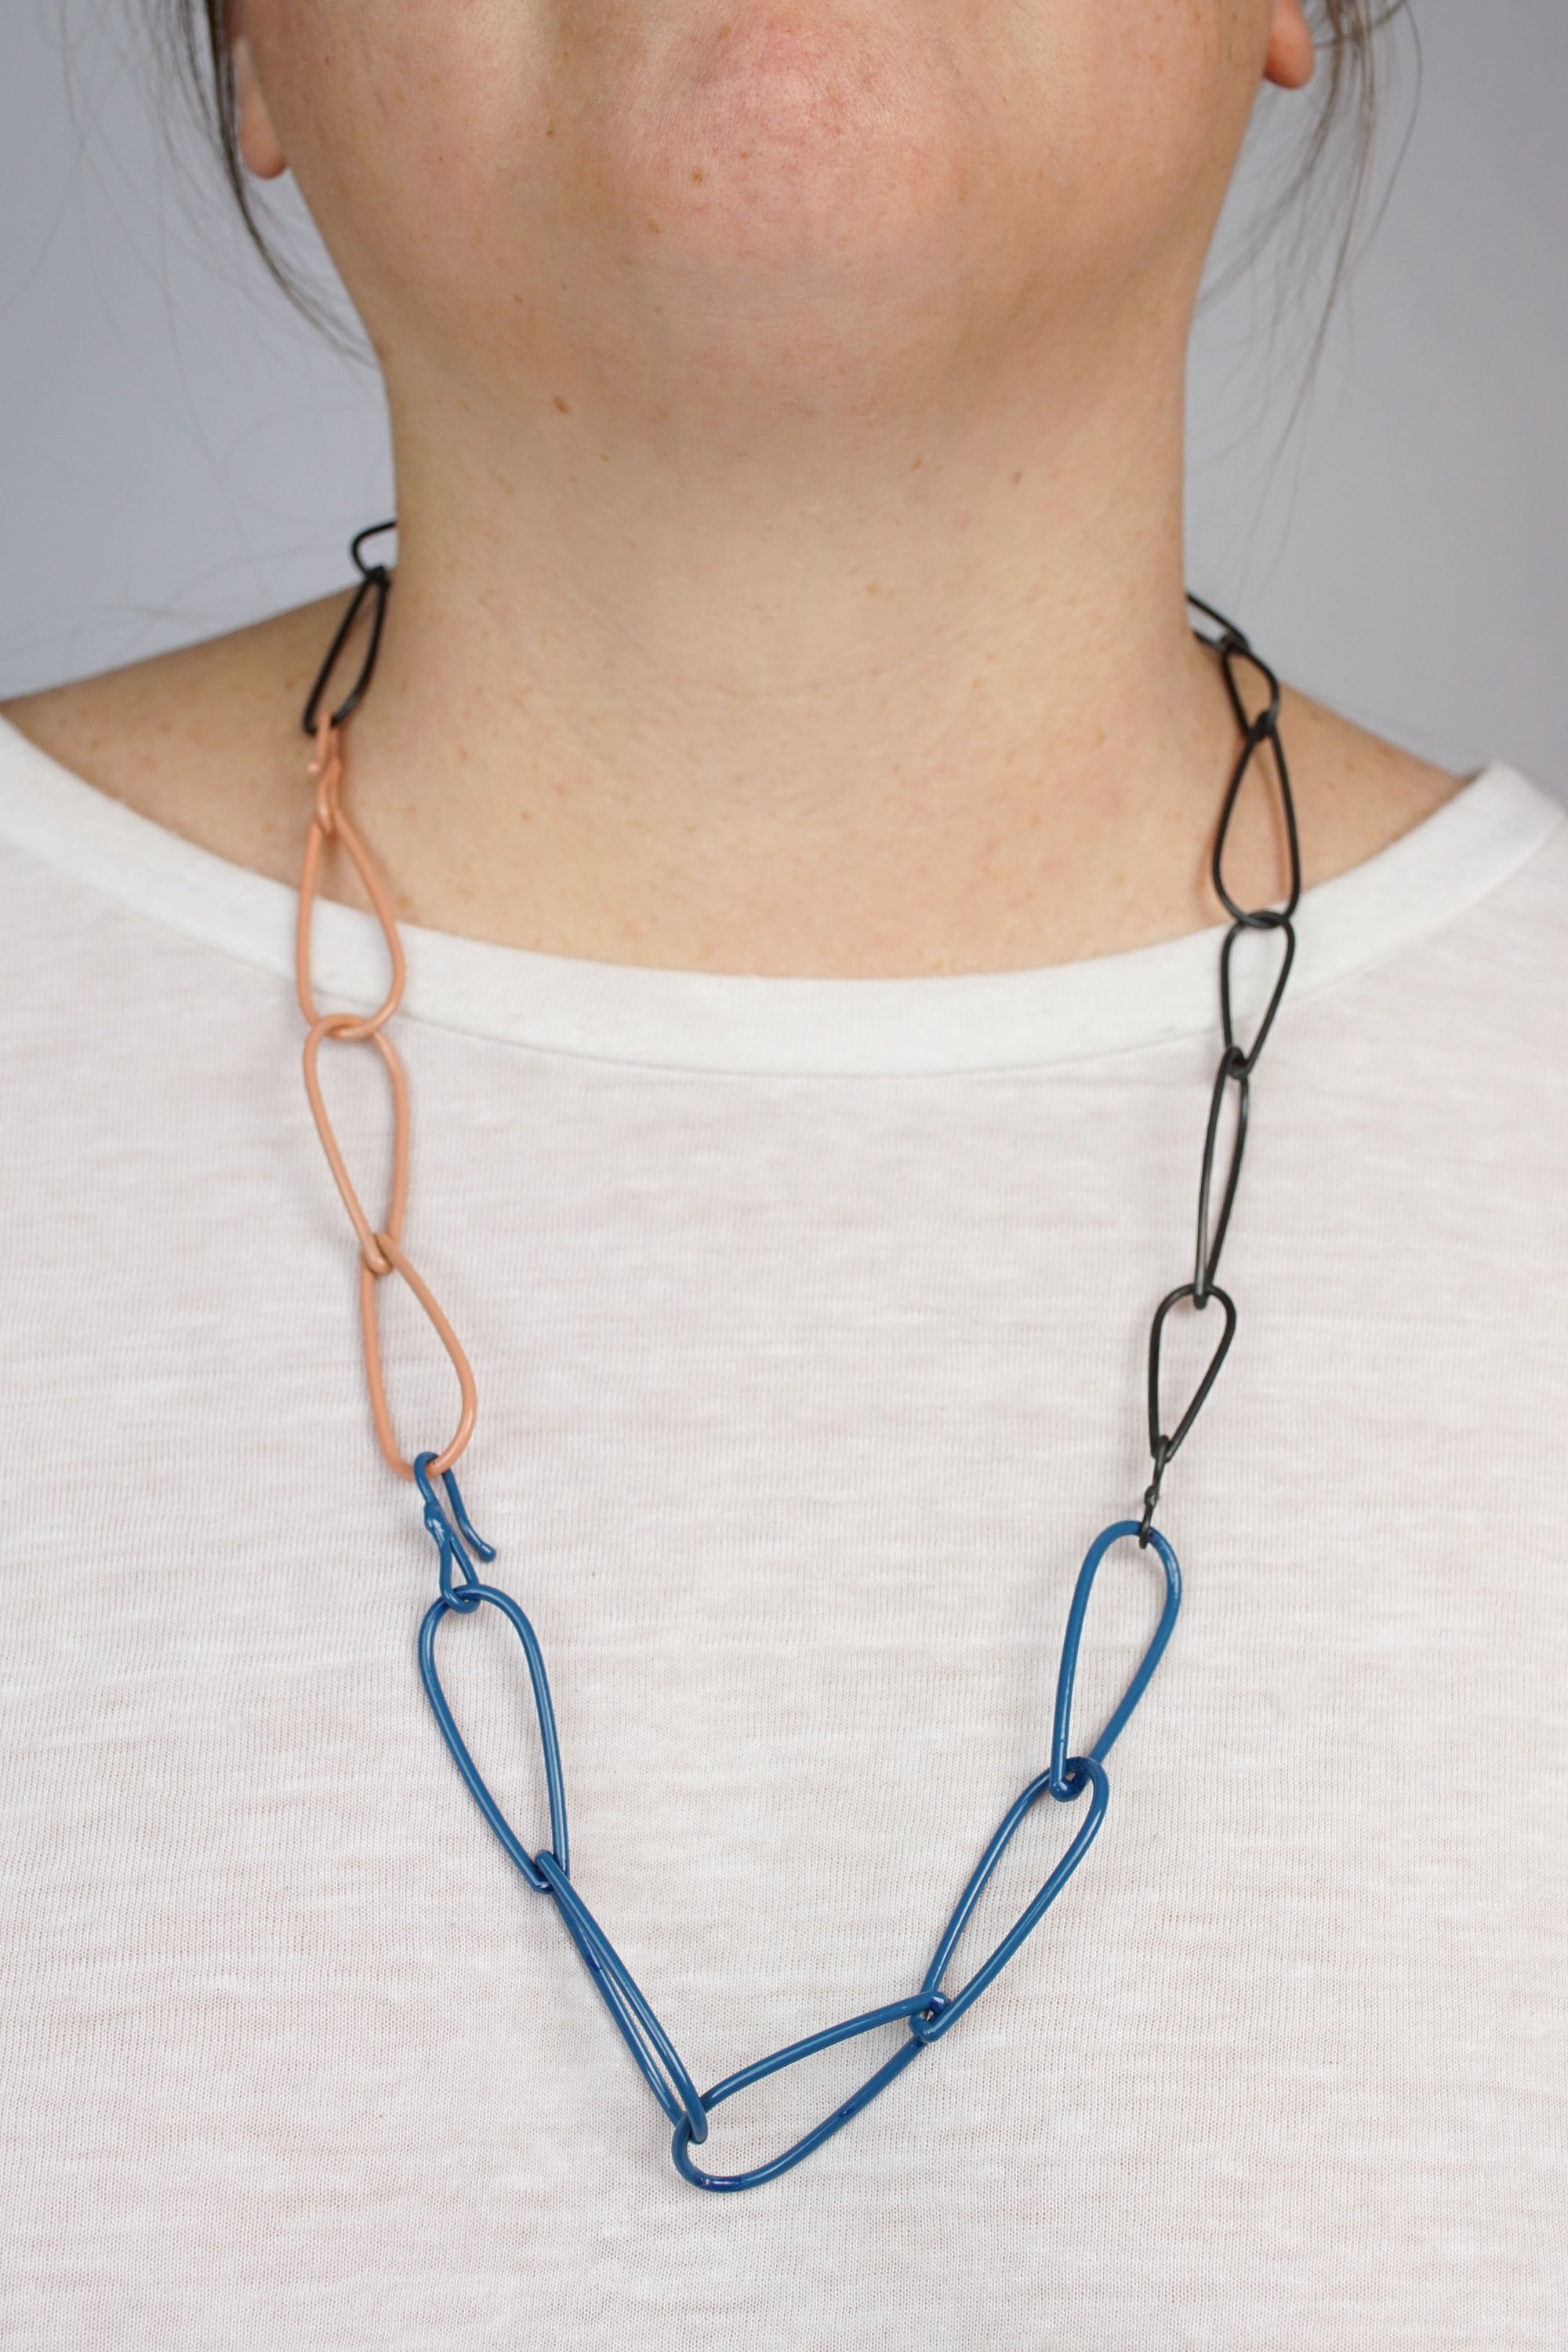 Modular Necklace in Steel, Azure Blue, and Dusty Rose